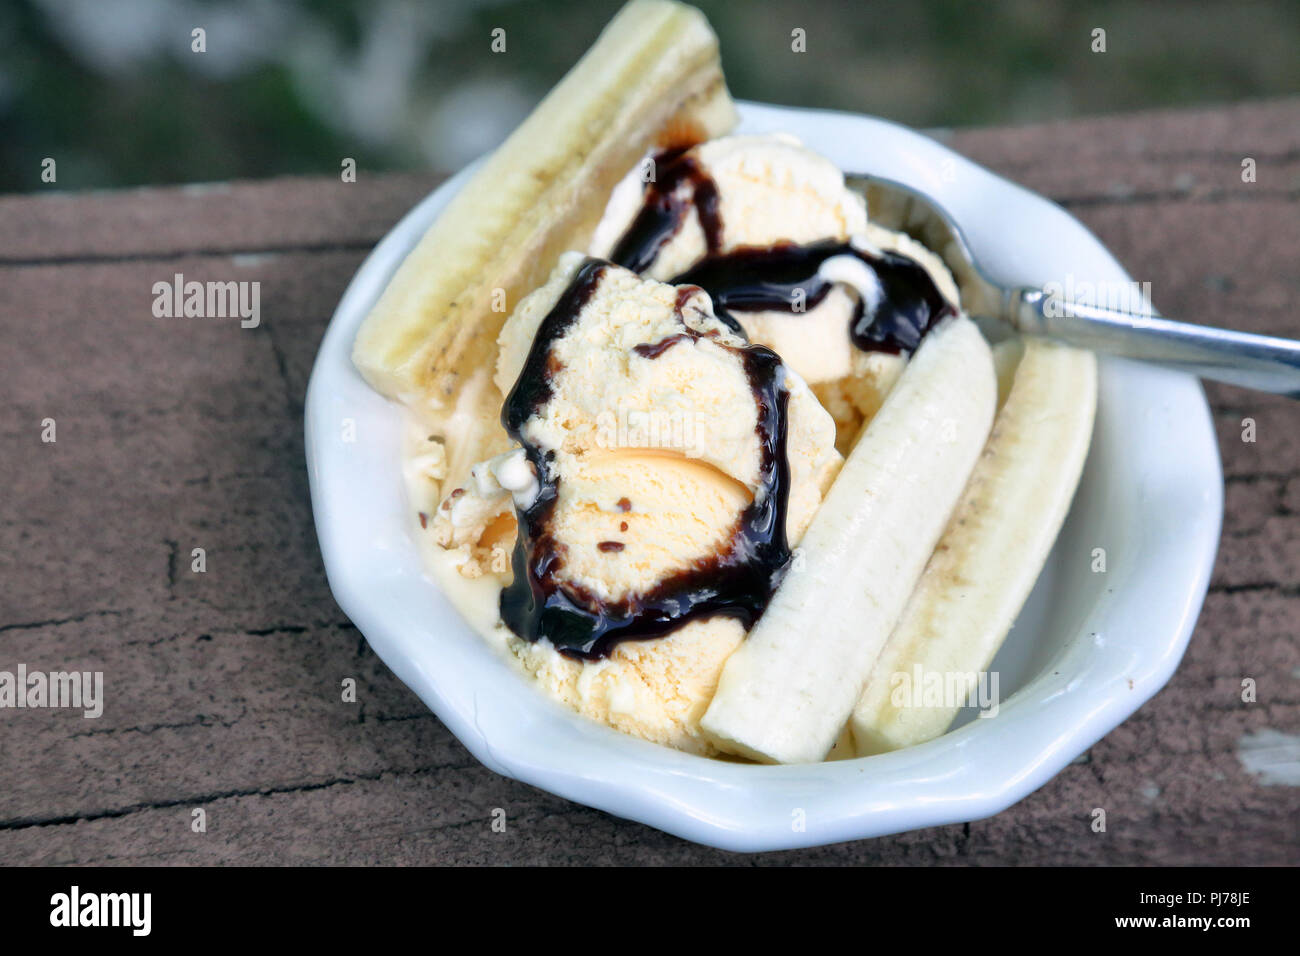 Hard ice cream just starting to melt, drizzled with chocolate sauce and garnished with banan slices in a white bowl on a painted brown wood surface wi Stock Photo